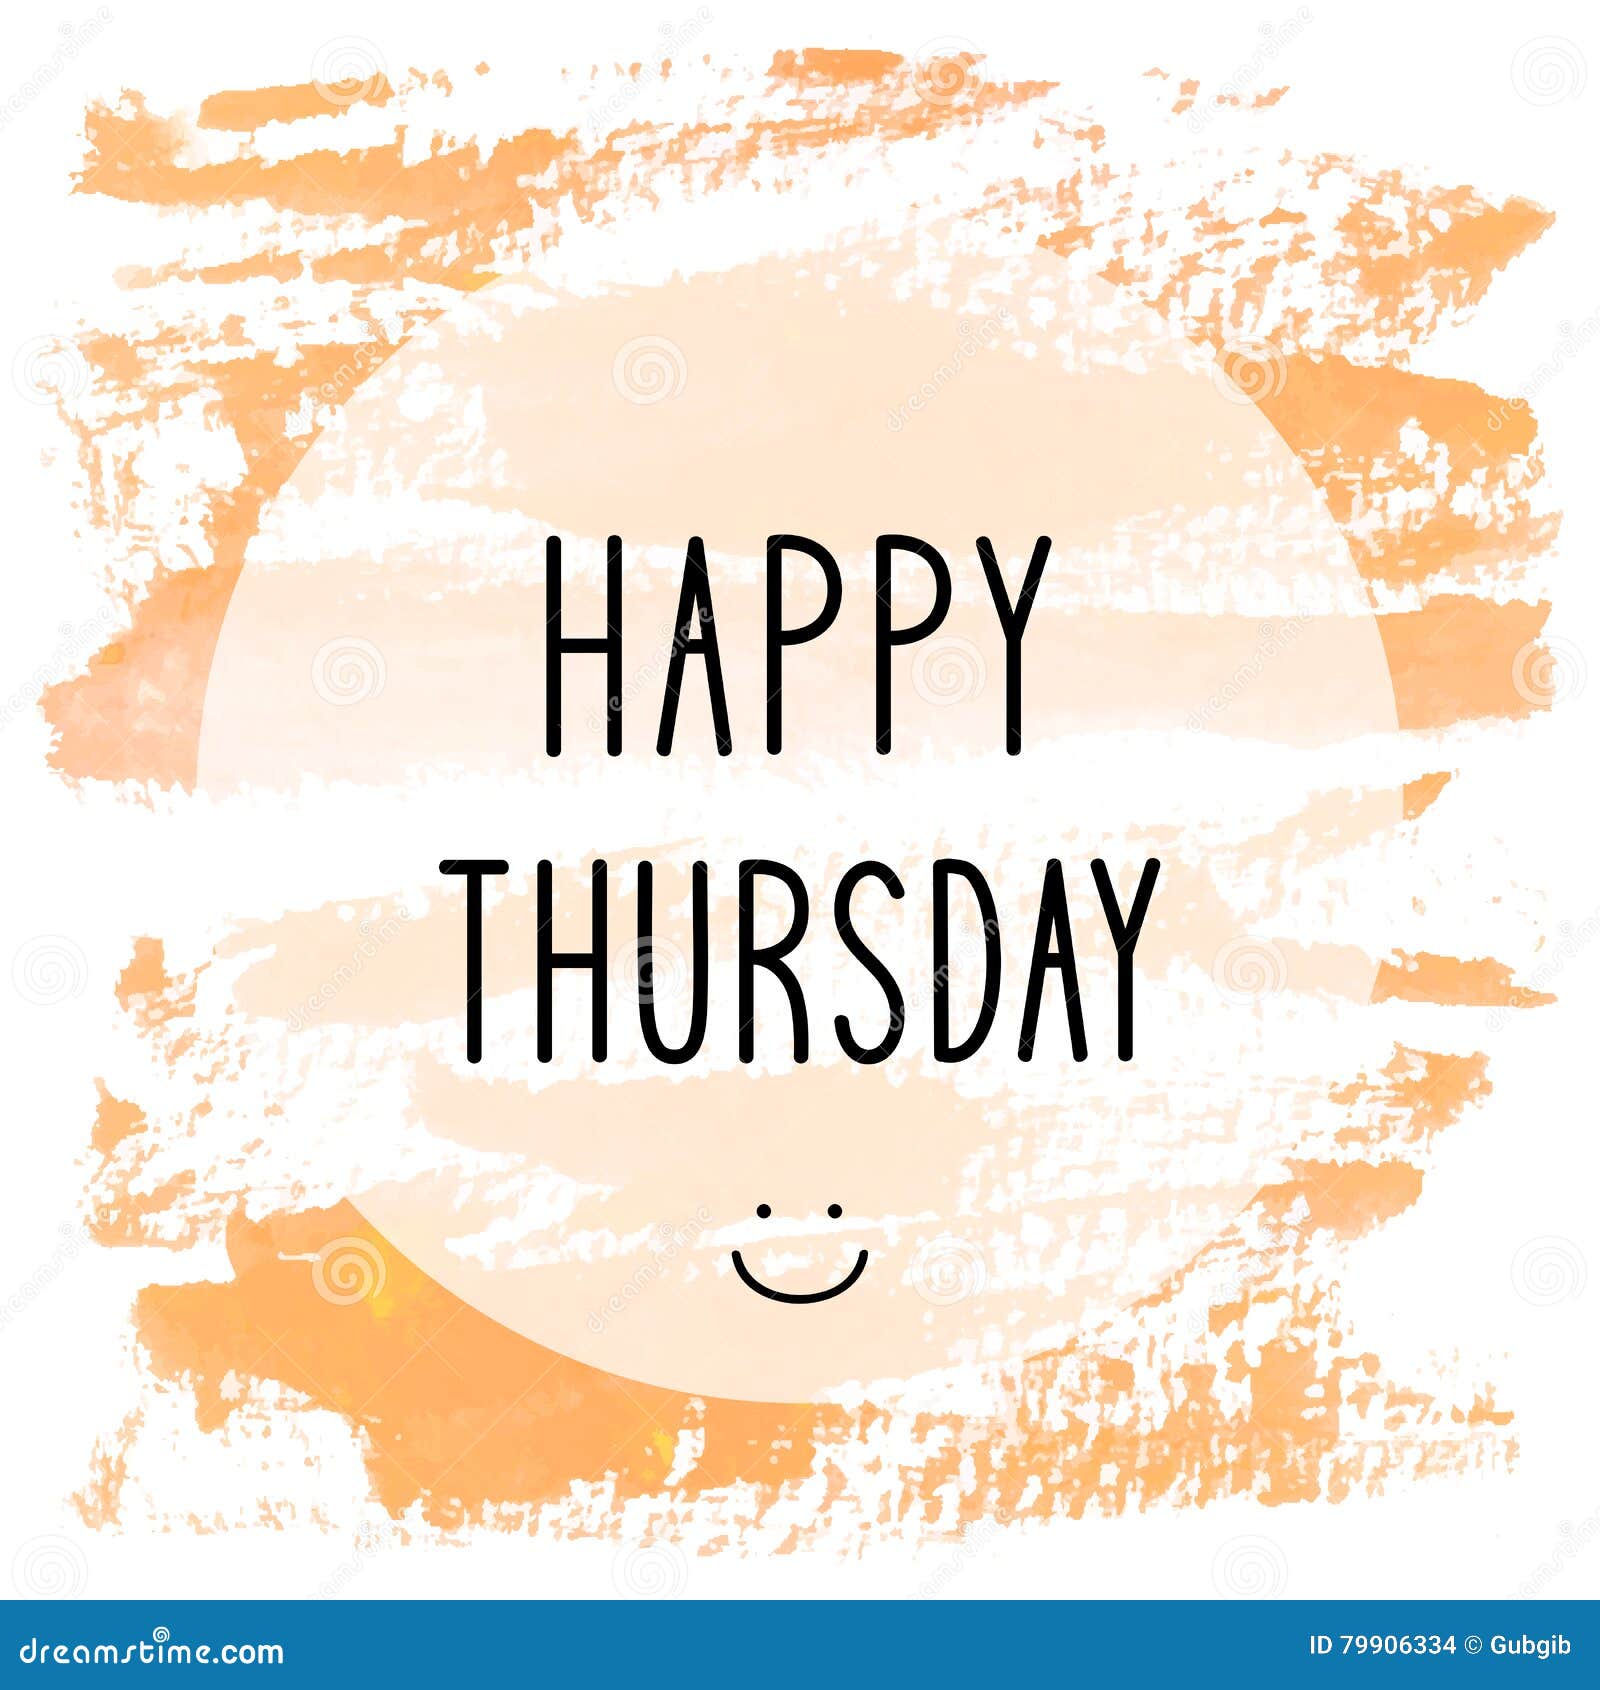 Happy Thursday Text on Orange Watercolor Background Stock ...